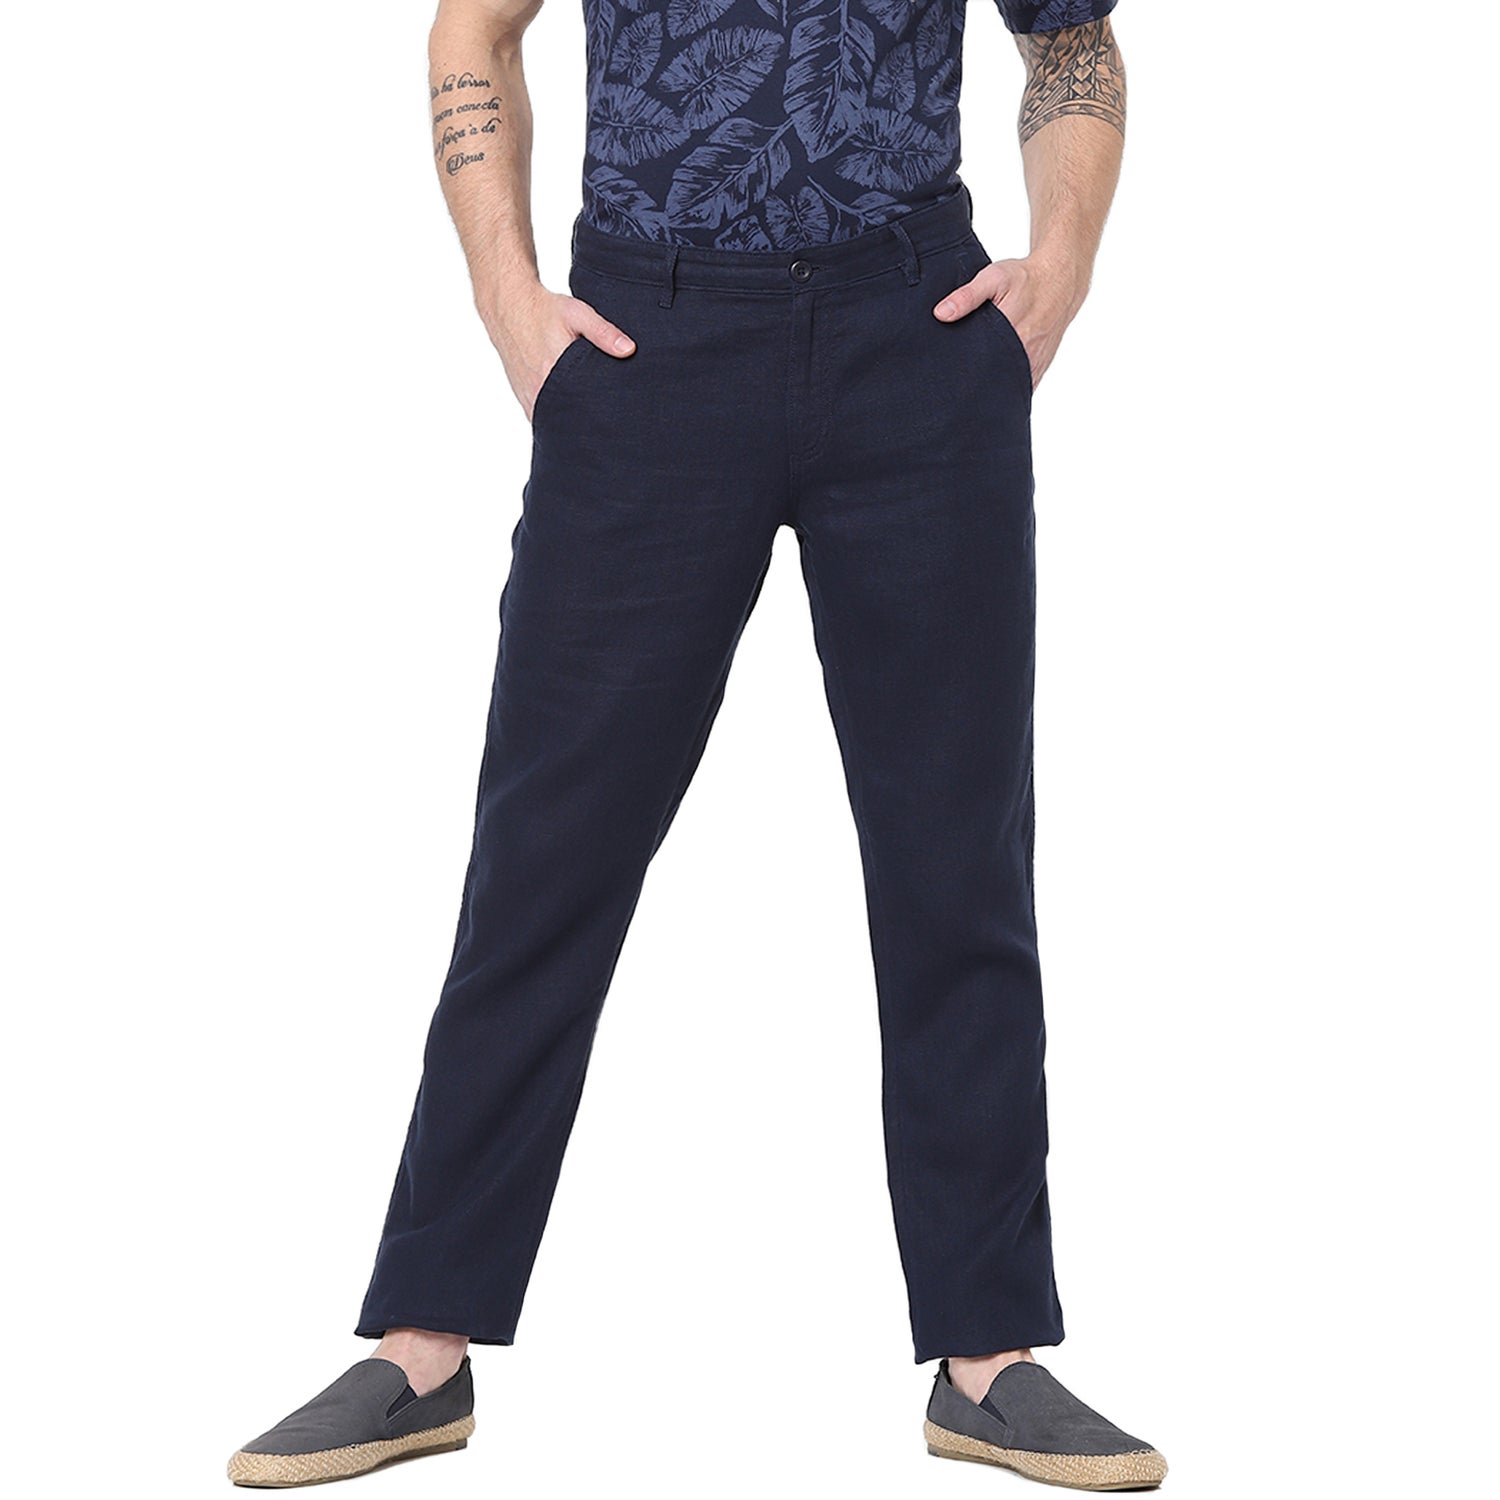 Straight Ultimate Built-In Flex Chino Pants for Men | Old Navy